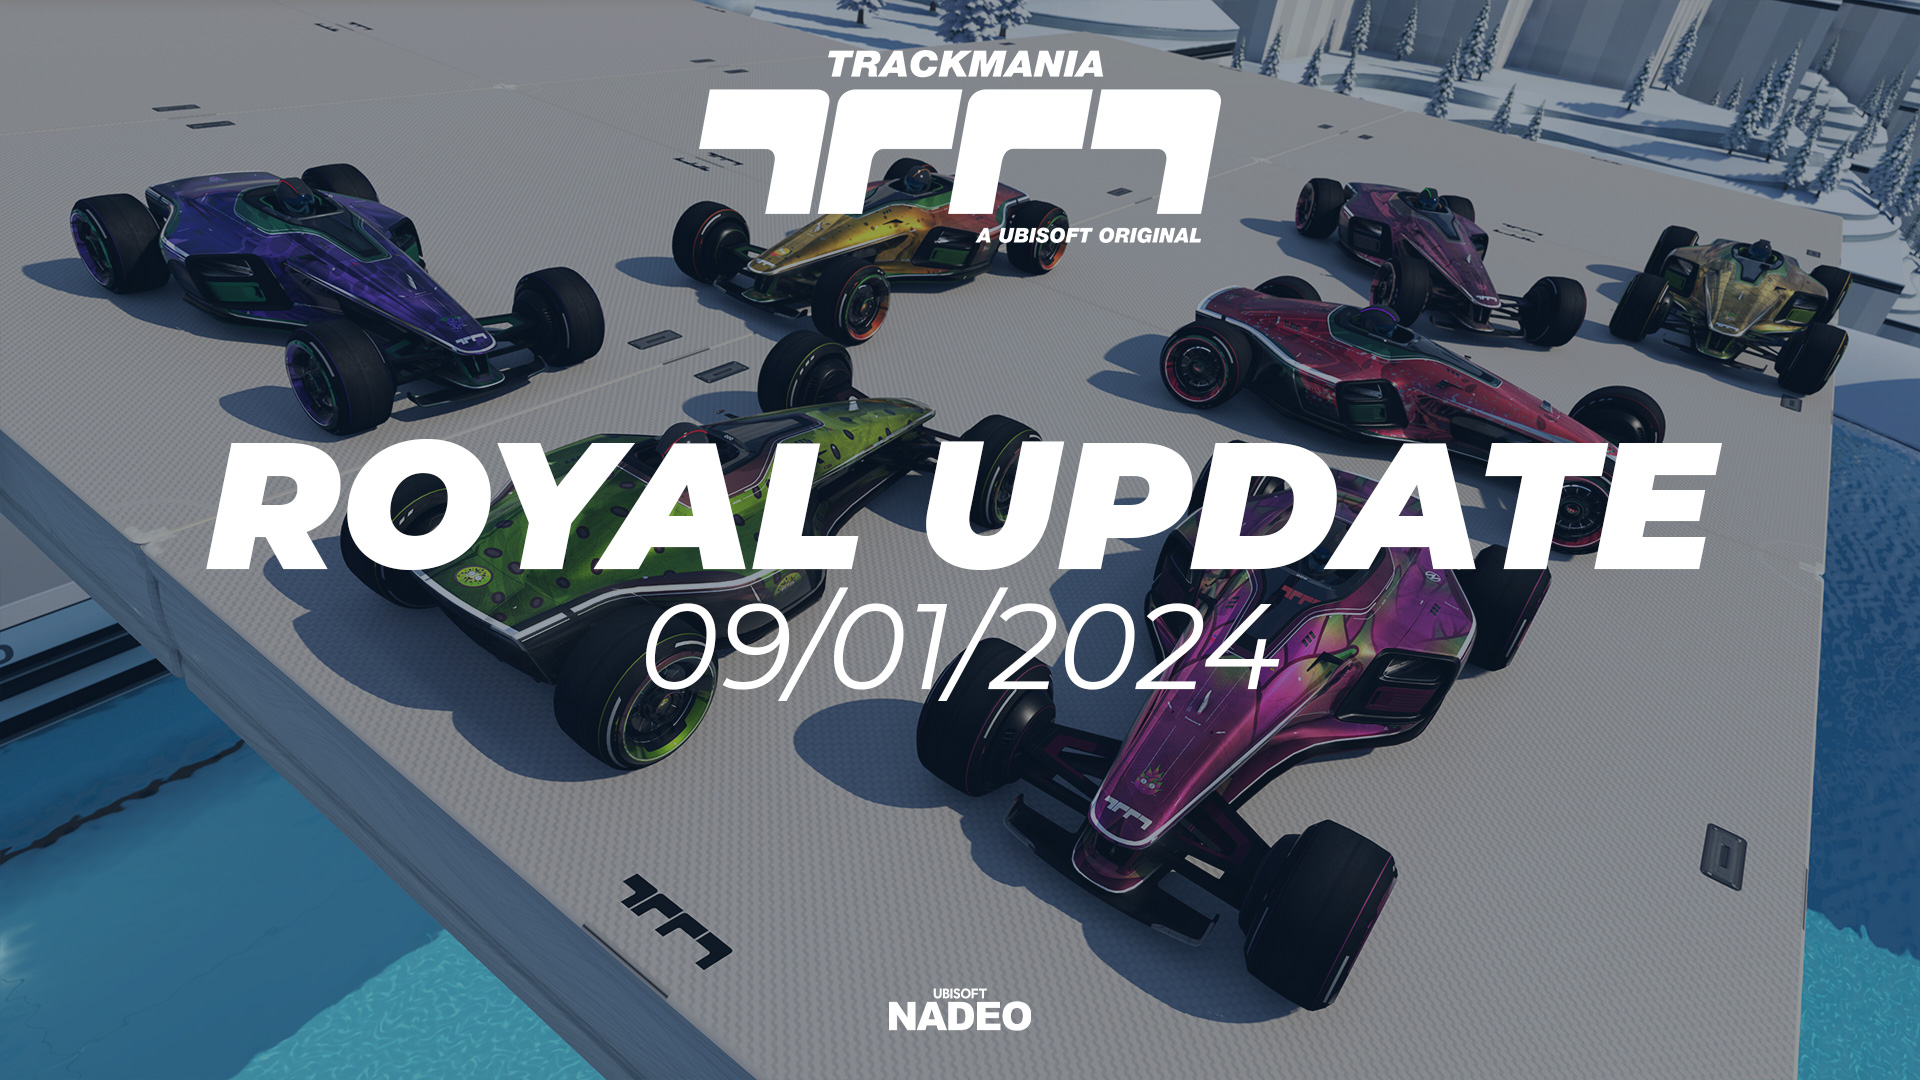 DISCOVER THE NEW ROYAL UPDATE!